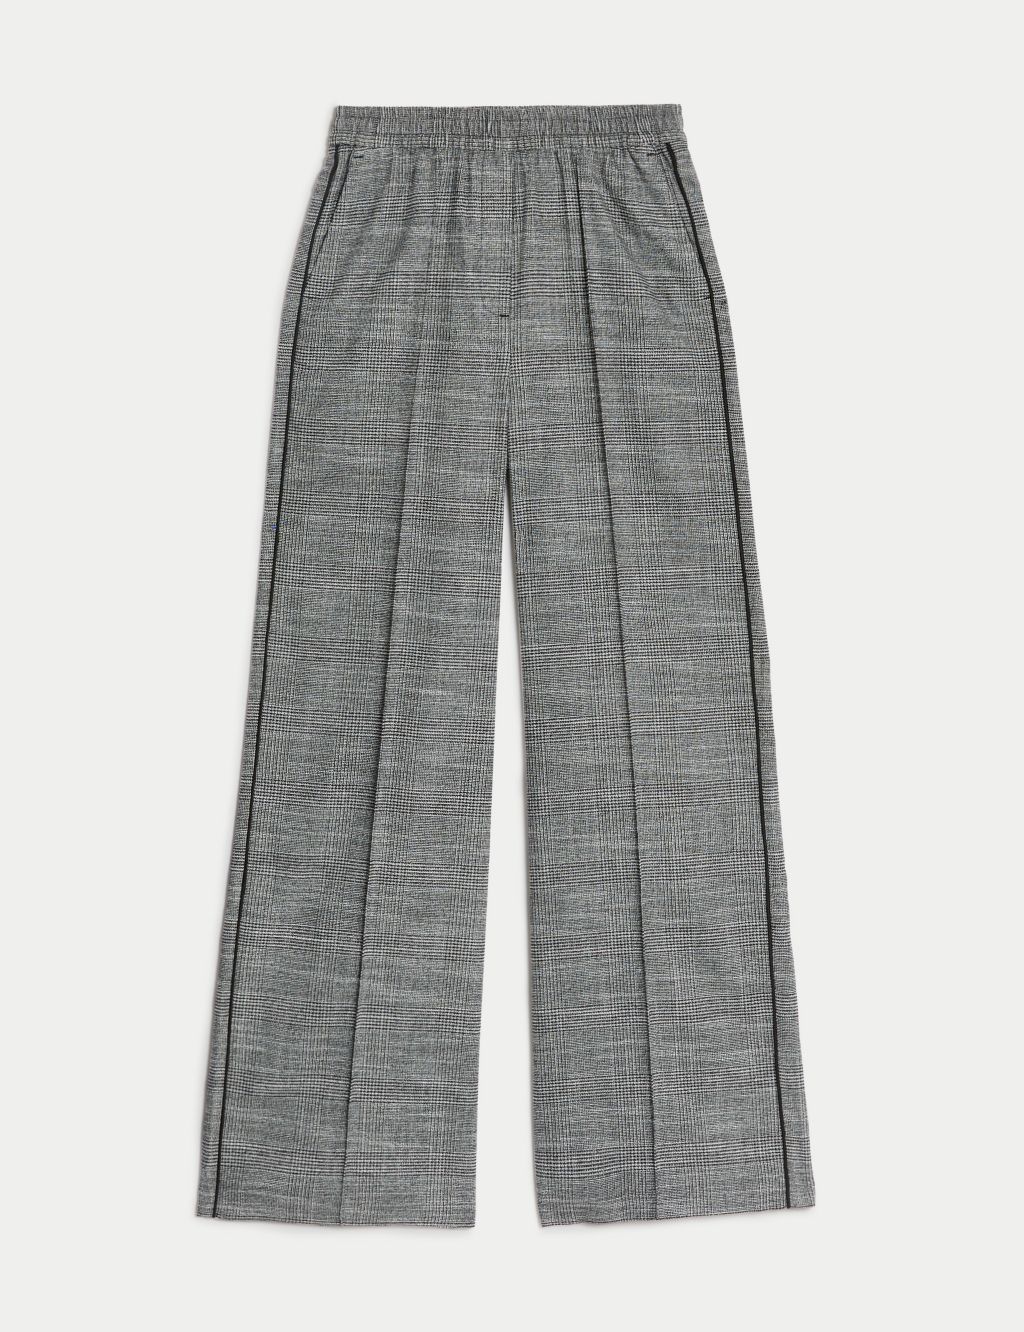 Checked Seam Detail Wide Leg Trousers image 2